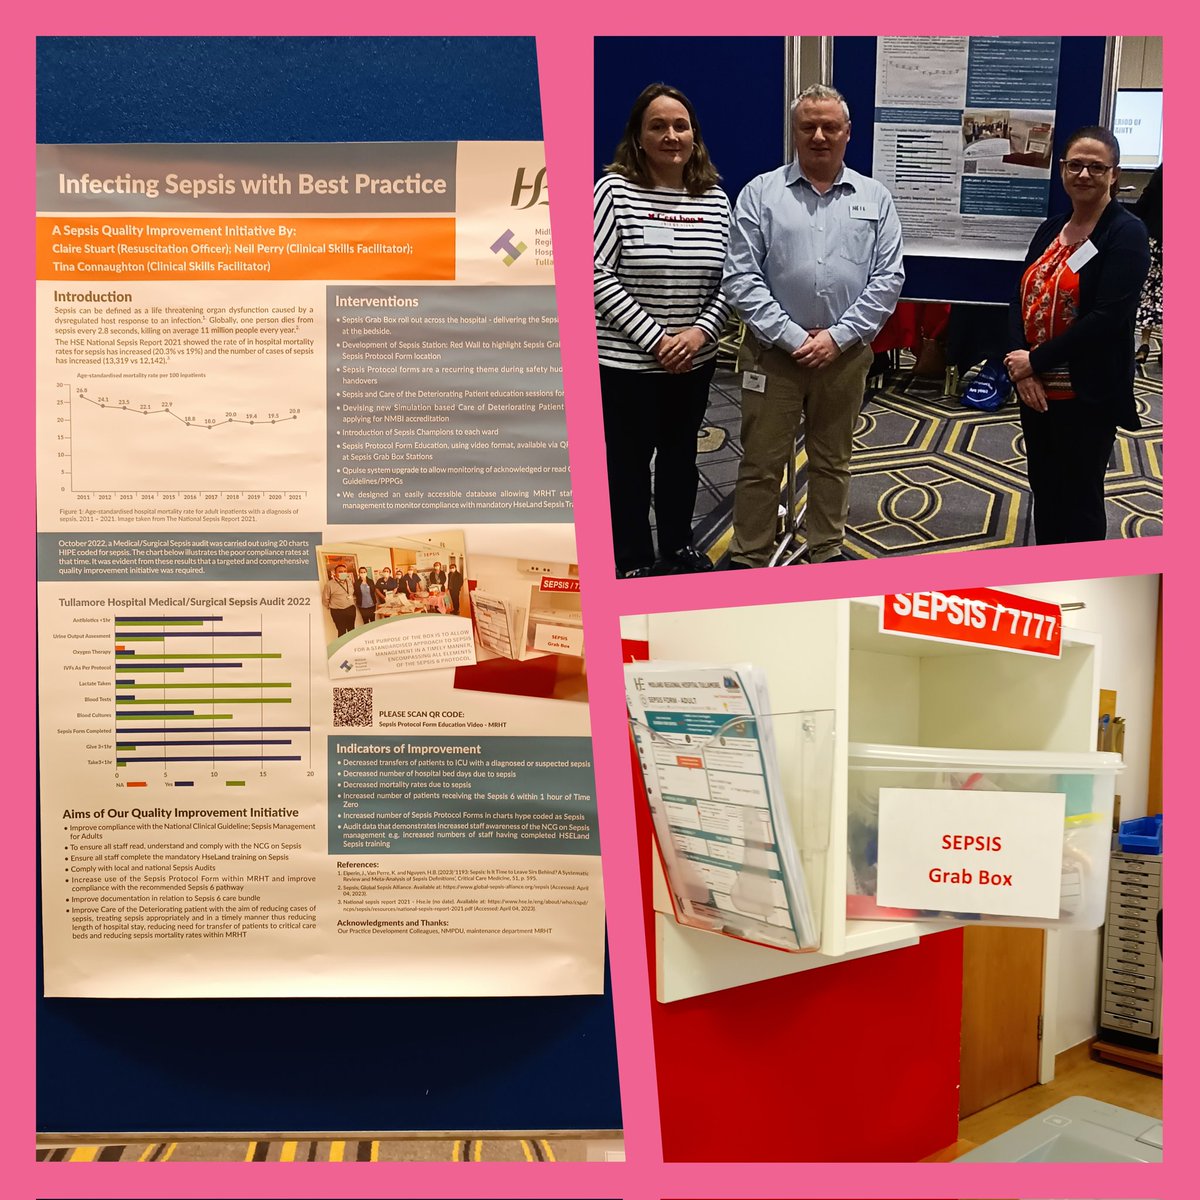 The MRHT Practice Development Team & QPS Team are delighted to present their sepsis grab box poster. At The Nursing & Midwifery Inaugural Conference. Thanks to Midlands NMPDU for their kind assistance @HSELive @DMHospitalGroup @NMPDMidlands